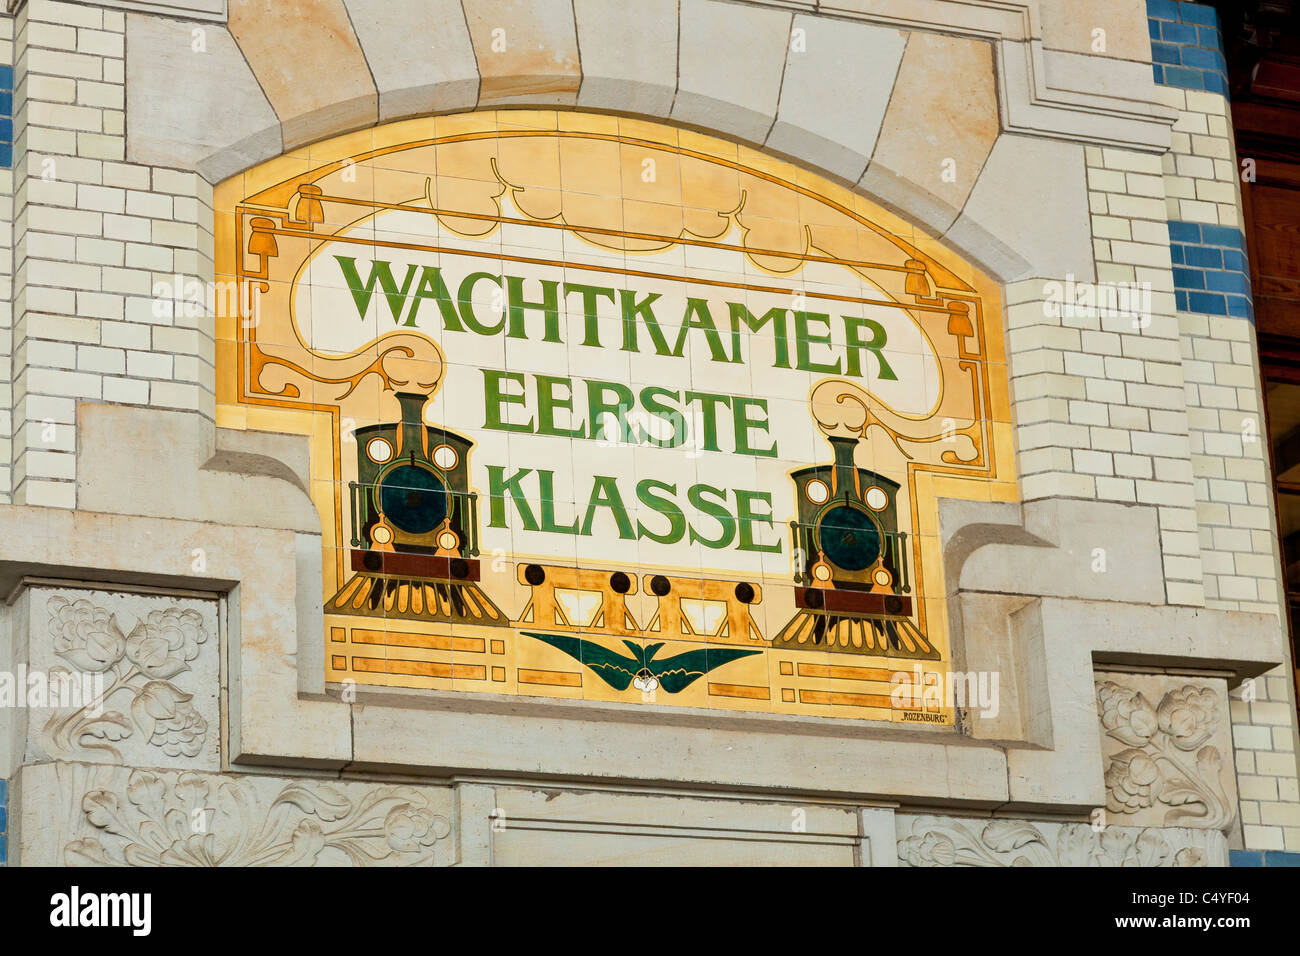 First class waiting room sign set in tiles at Haarlem Railway Station, Haarlem, Holland, Netherlands. JMH5065 Stock Photo